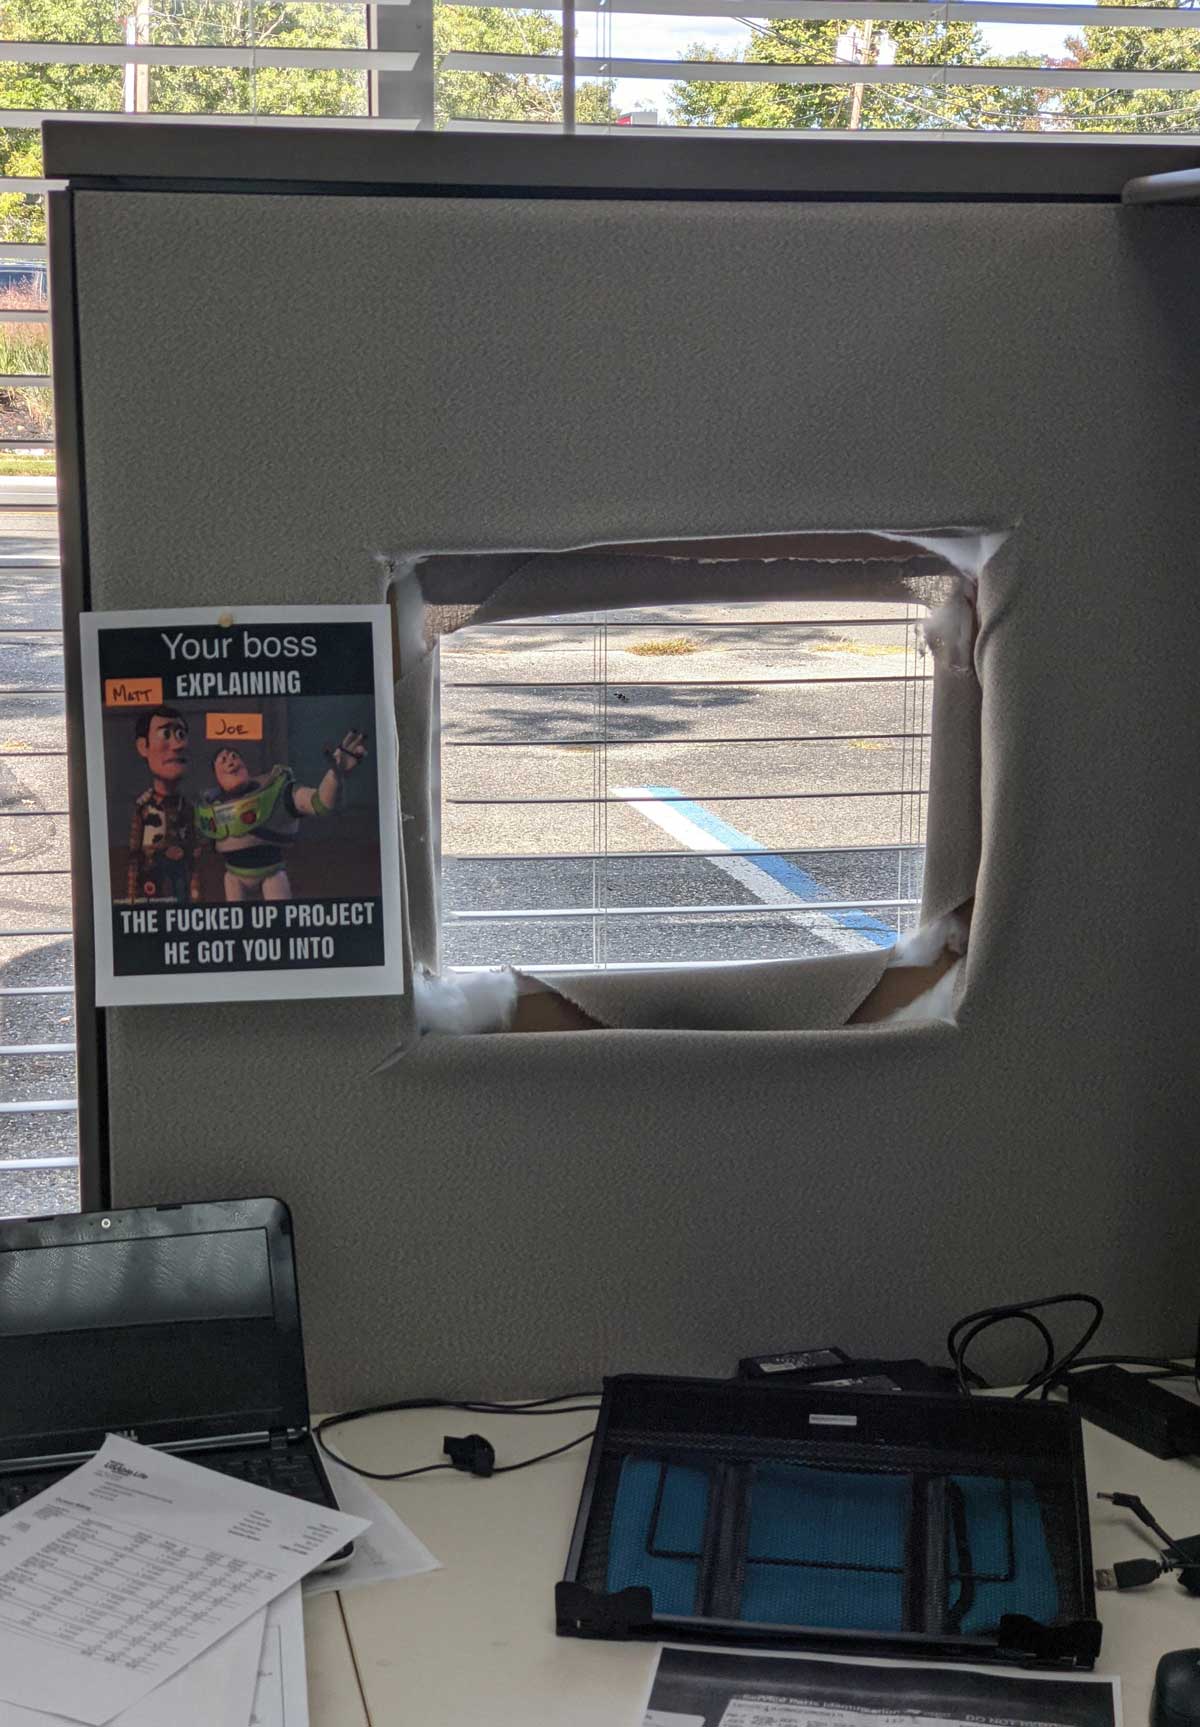 Got new cubicles installed at work. They were installed incorrectly, blocking the window, so my boss improvised